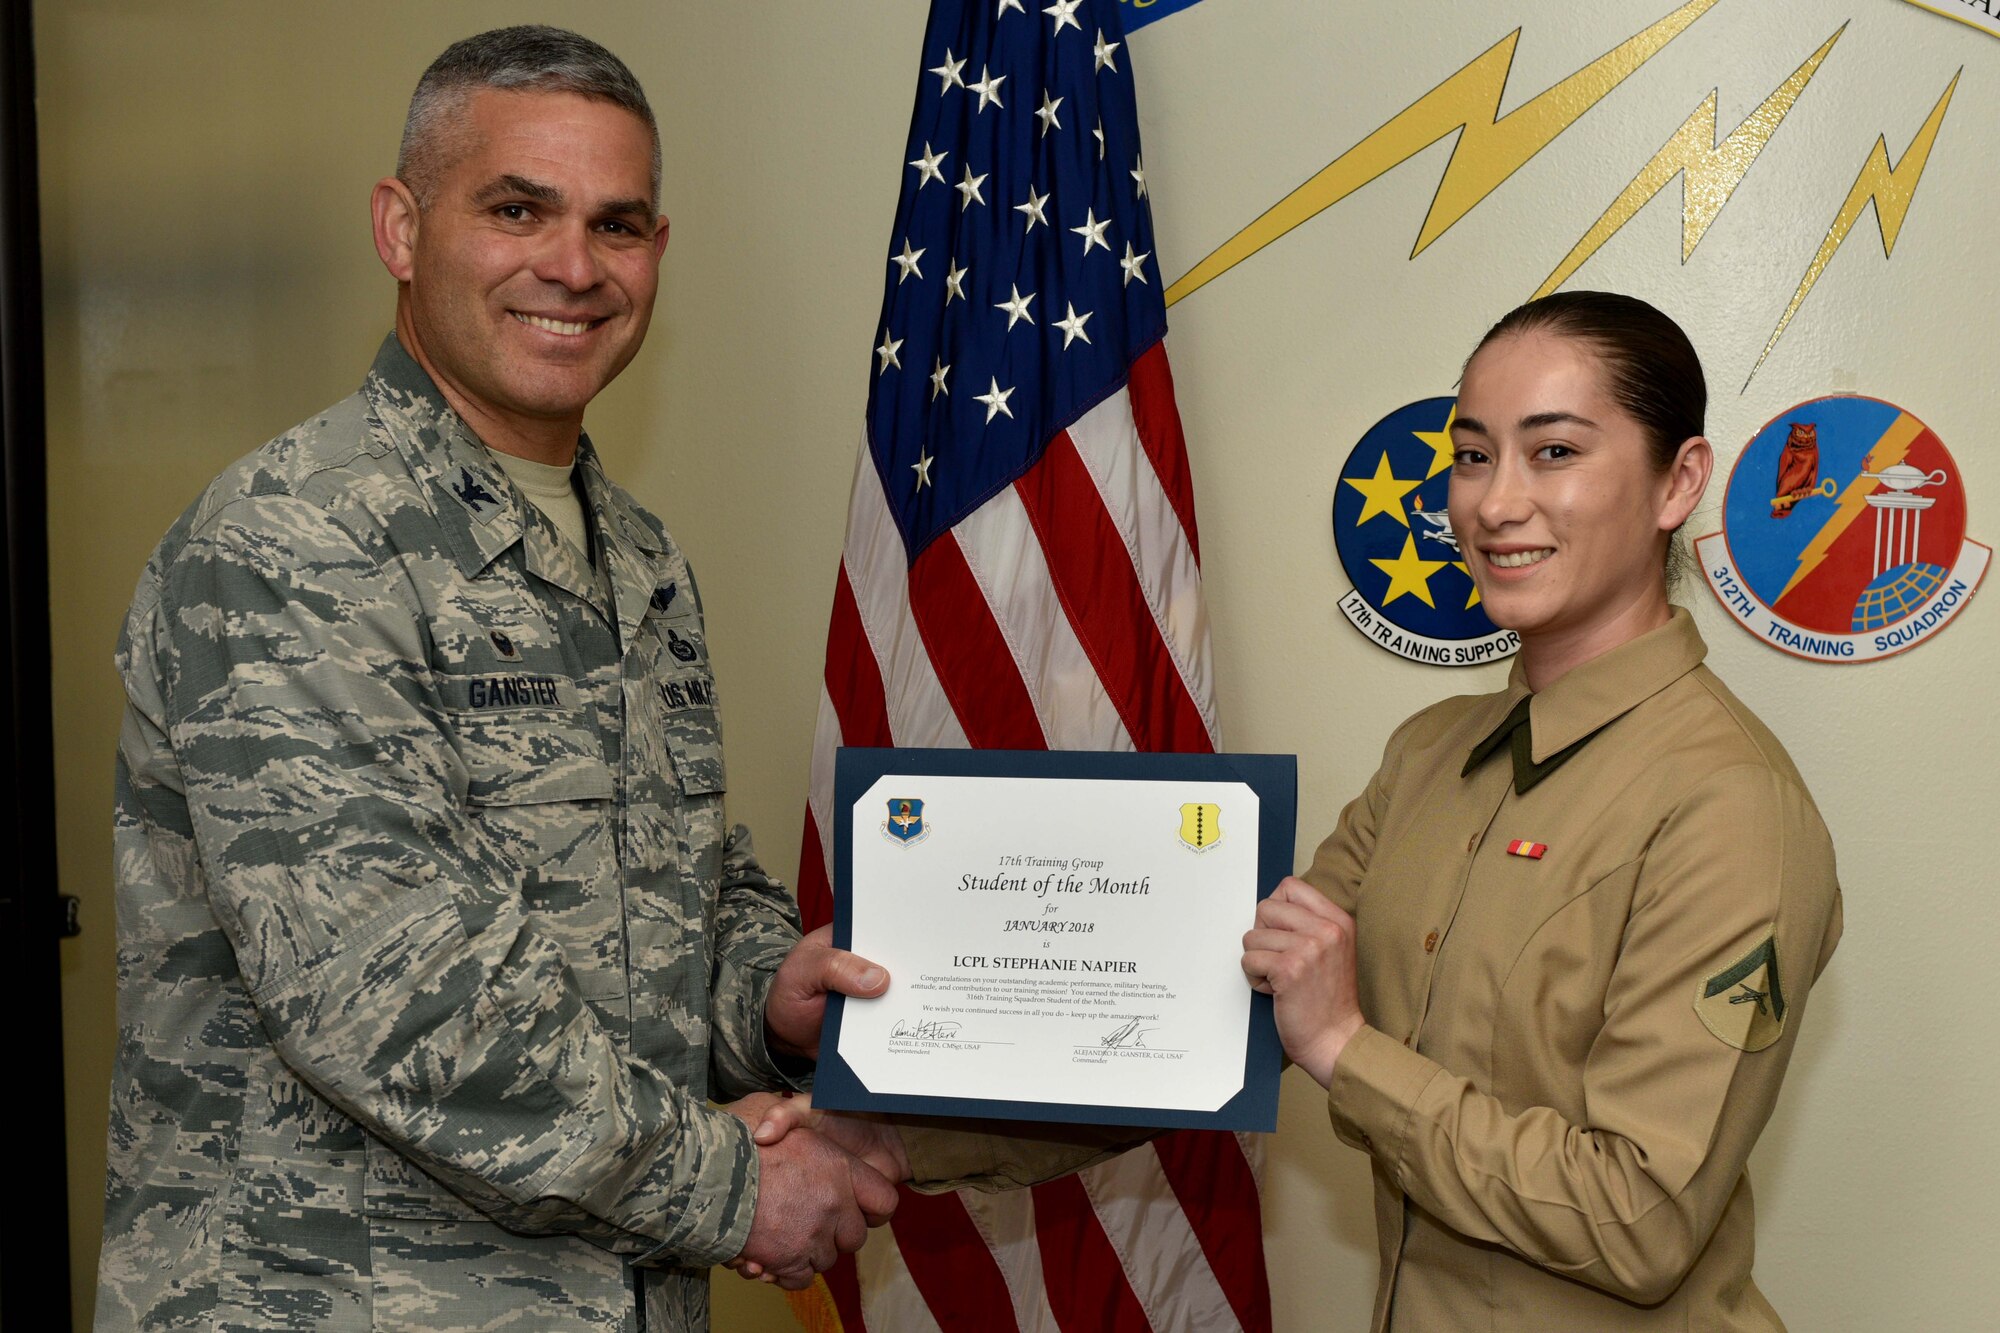 U.S. Air Force Col. Alex Ganster, 17th Training Group commander, presents the 316th Training Squadron Student of the Month award for Jan. 2018 to U.S. Marine Corps Lance Cpl. Stephanie Napier, Marine Corps Detachment at Goodfellow trainee, in the Brandenburg Hall on Goodfellow Air Force Base, Texas, Jan. 2, 2018. The 316th Training Squadron’s mission is to conduct U.S. Air Force, U.S. Army, U.S. Marine Corps, U.S. Navy and U.S. Coast Guard cryptologic, human intelligence and military training.